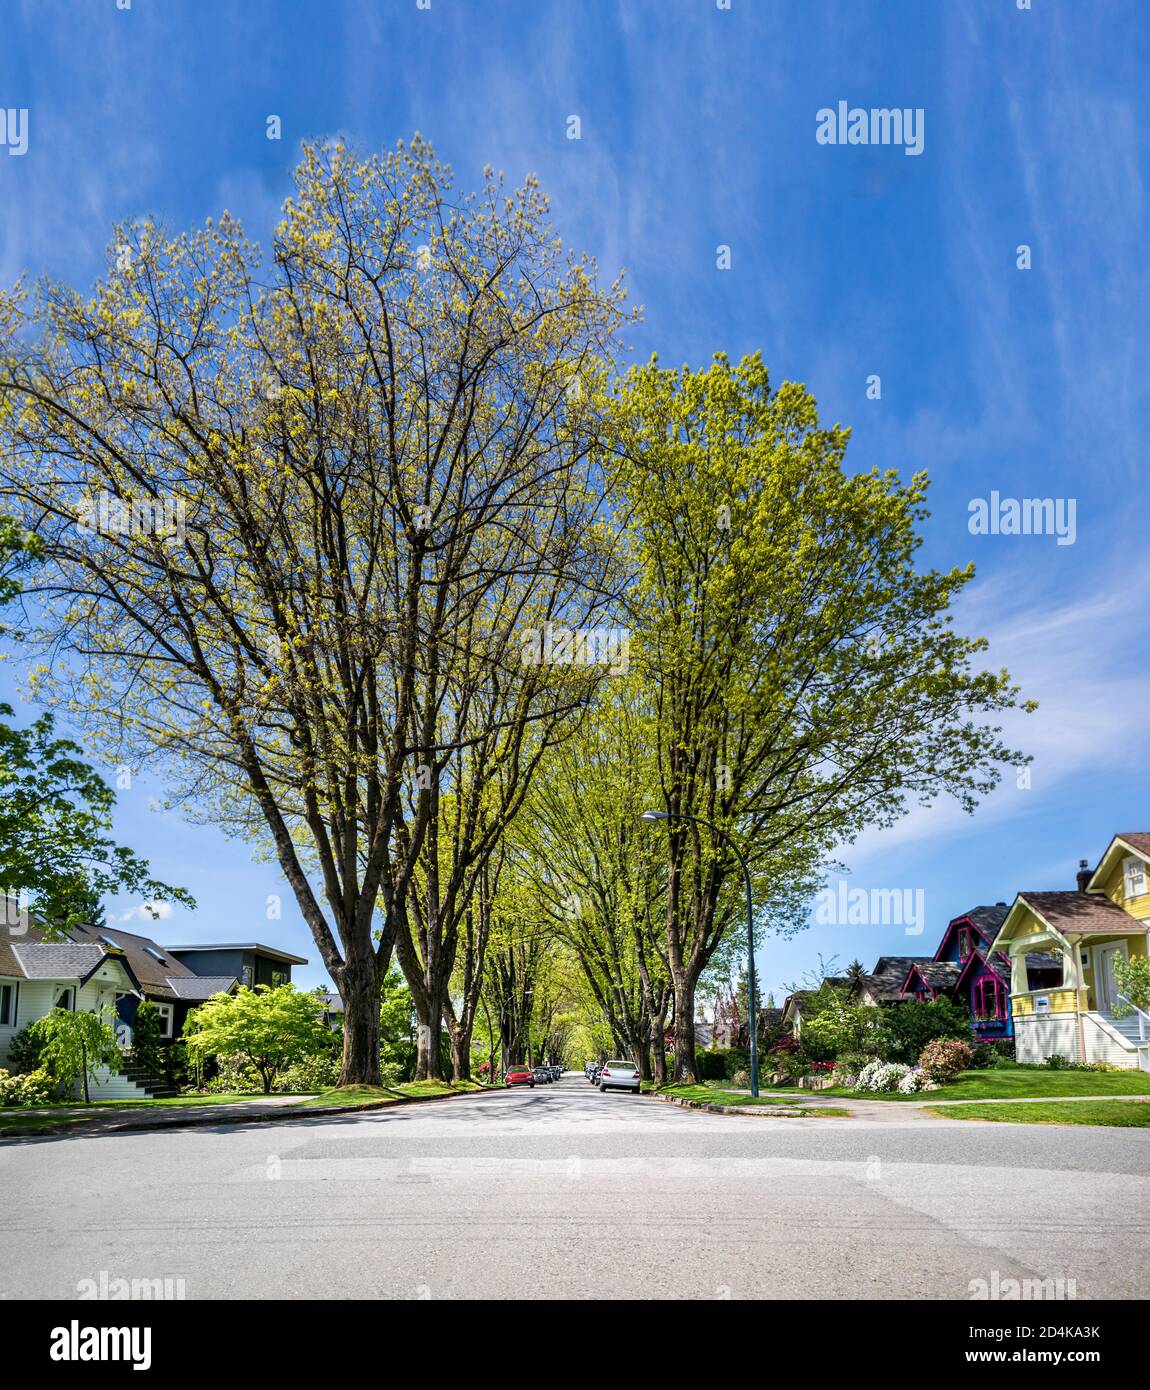 Residential neighborhood street with giant elm trees. Beautiful sunny spring day. Intersection with parked cars on tree covered street, no people. Urb Stock Photo